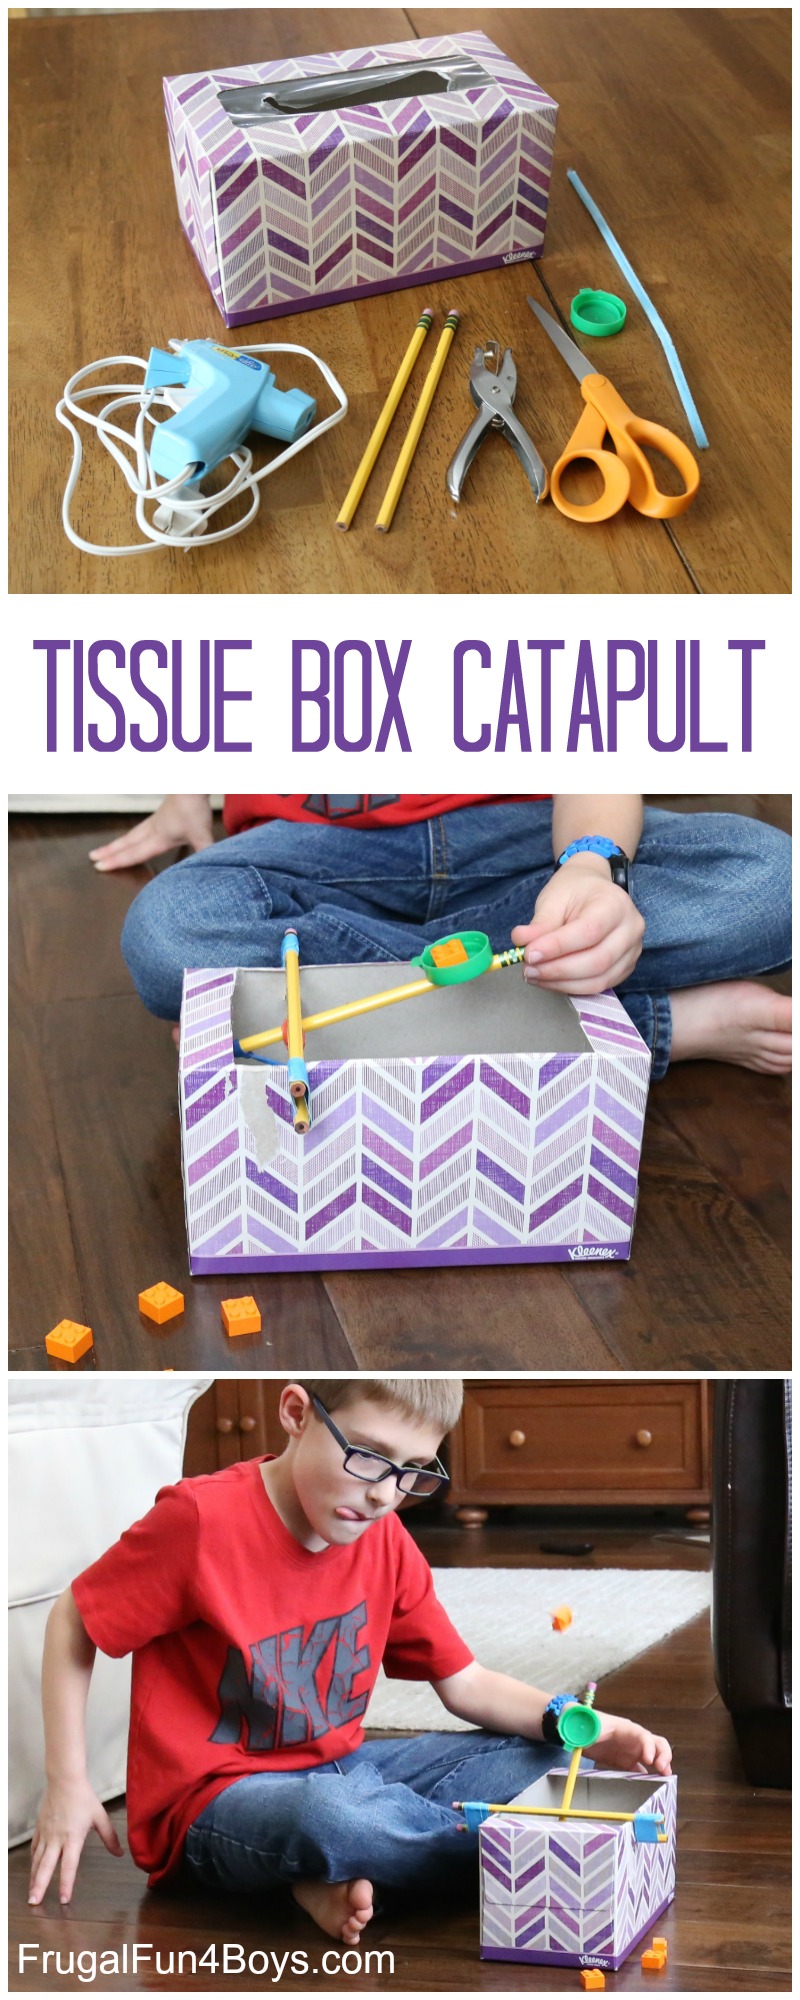 How to Build a Tissue Box Catapult 